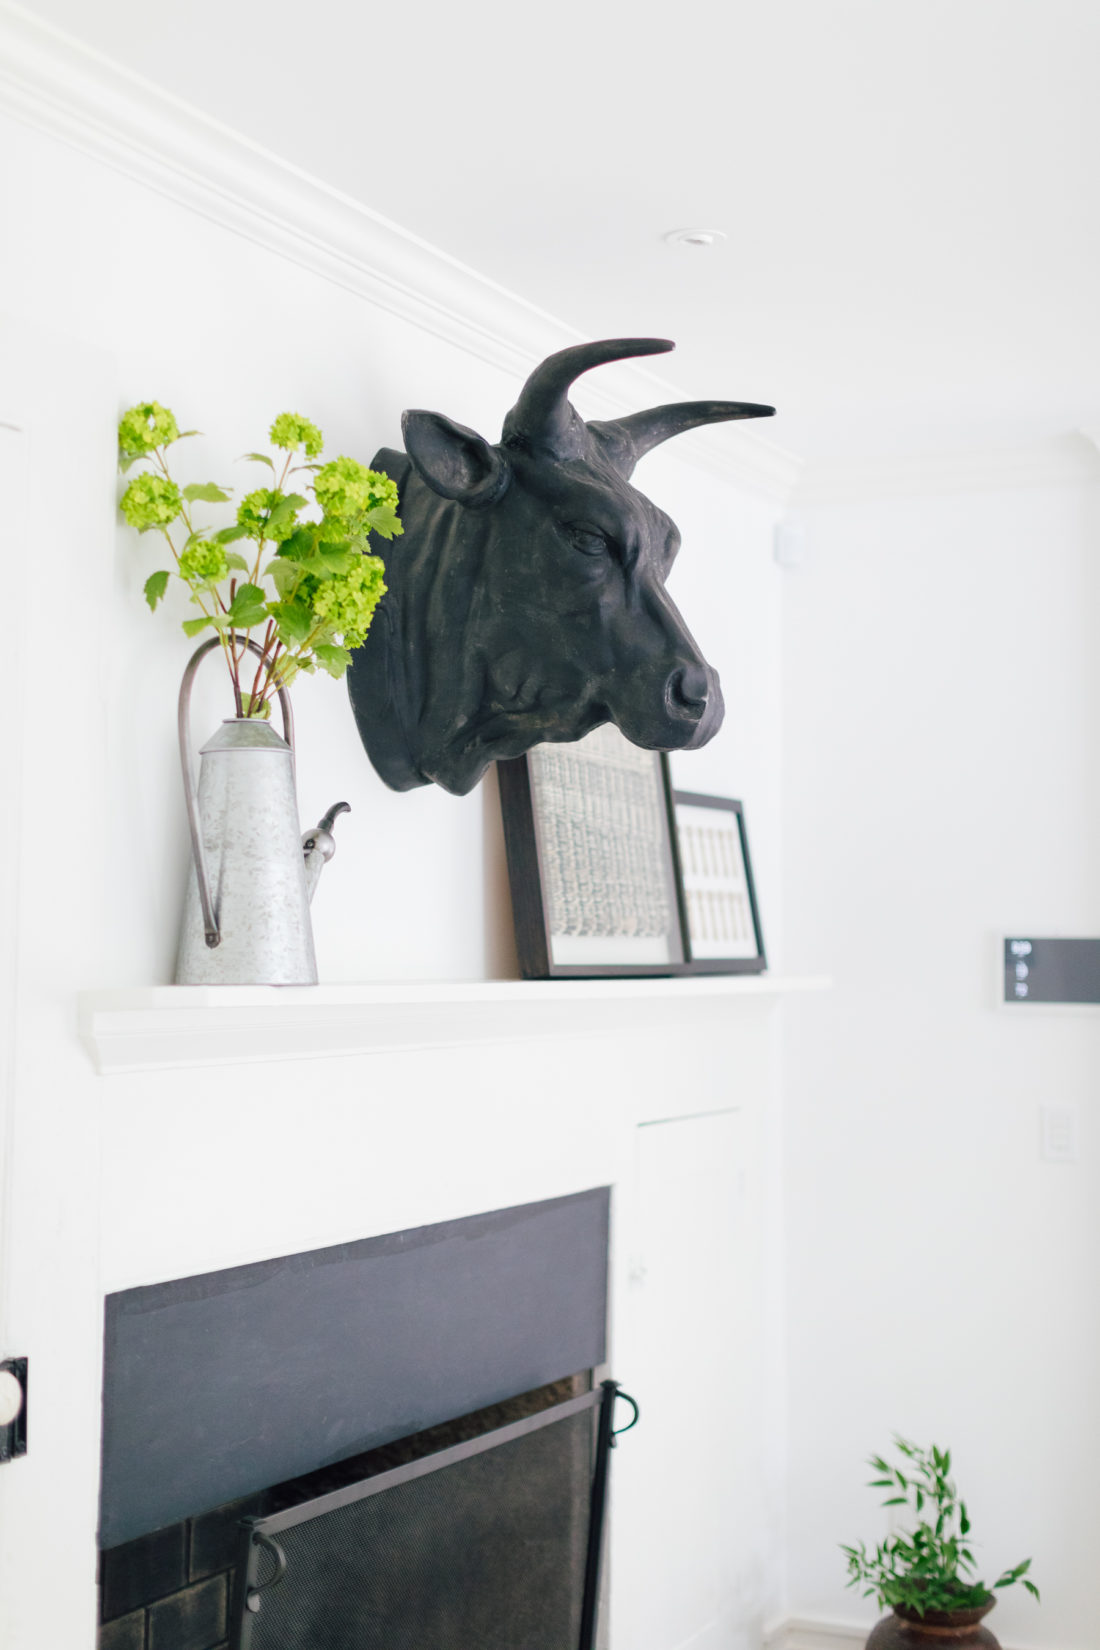 A steel bull's head has a place of honor over the fireplace in Eva Amurri Martino's connecticut kitchen